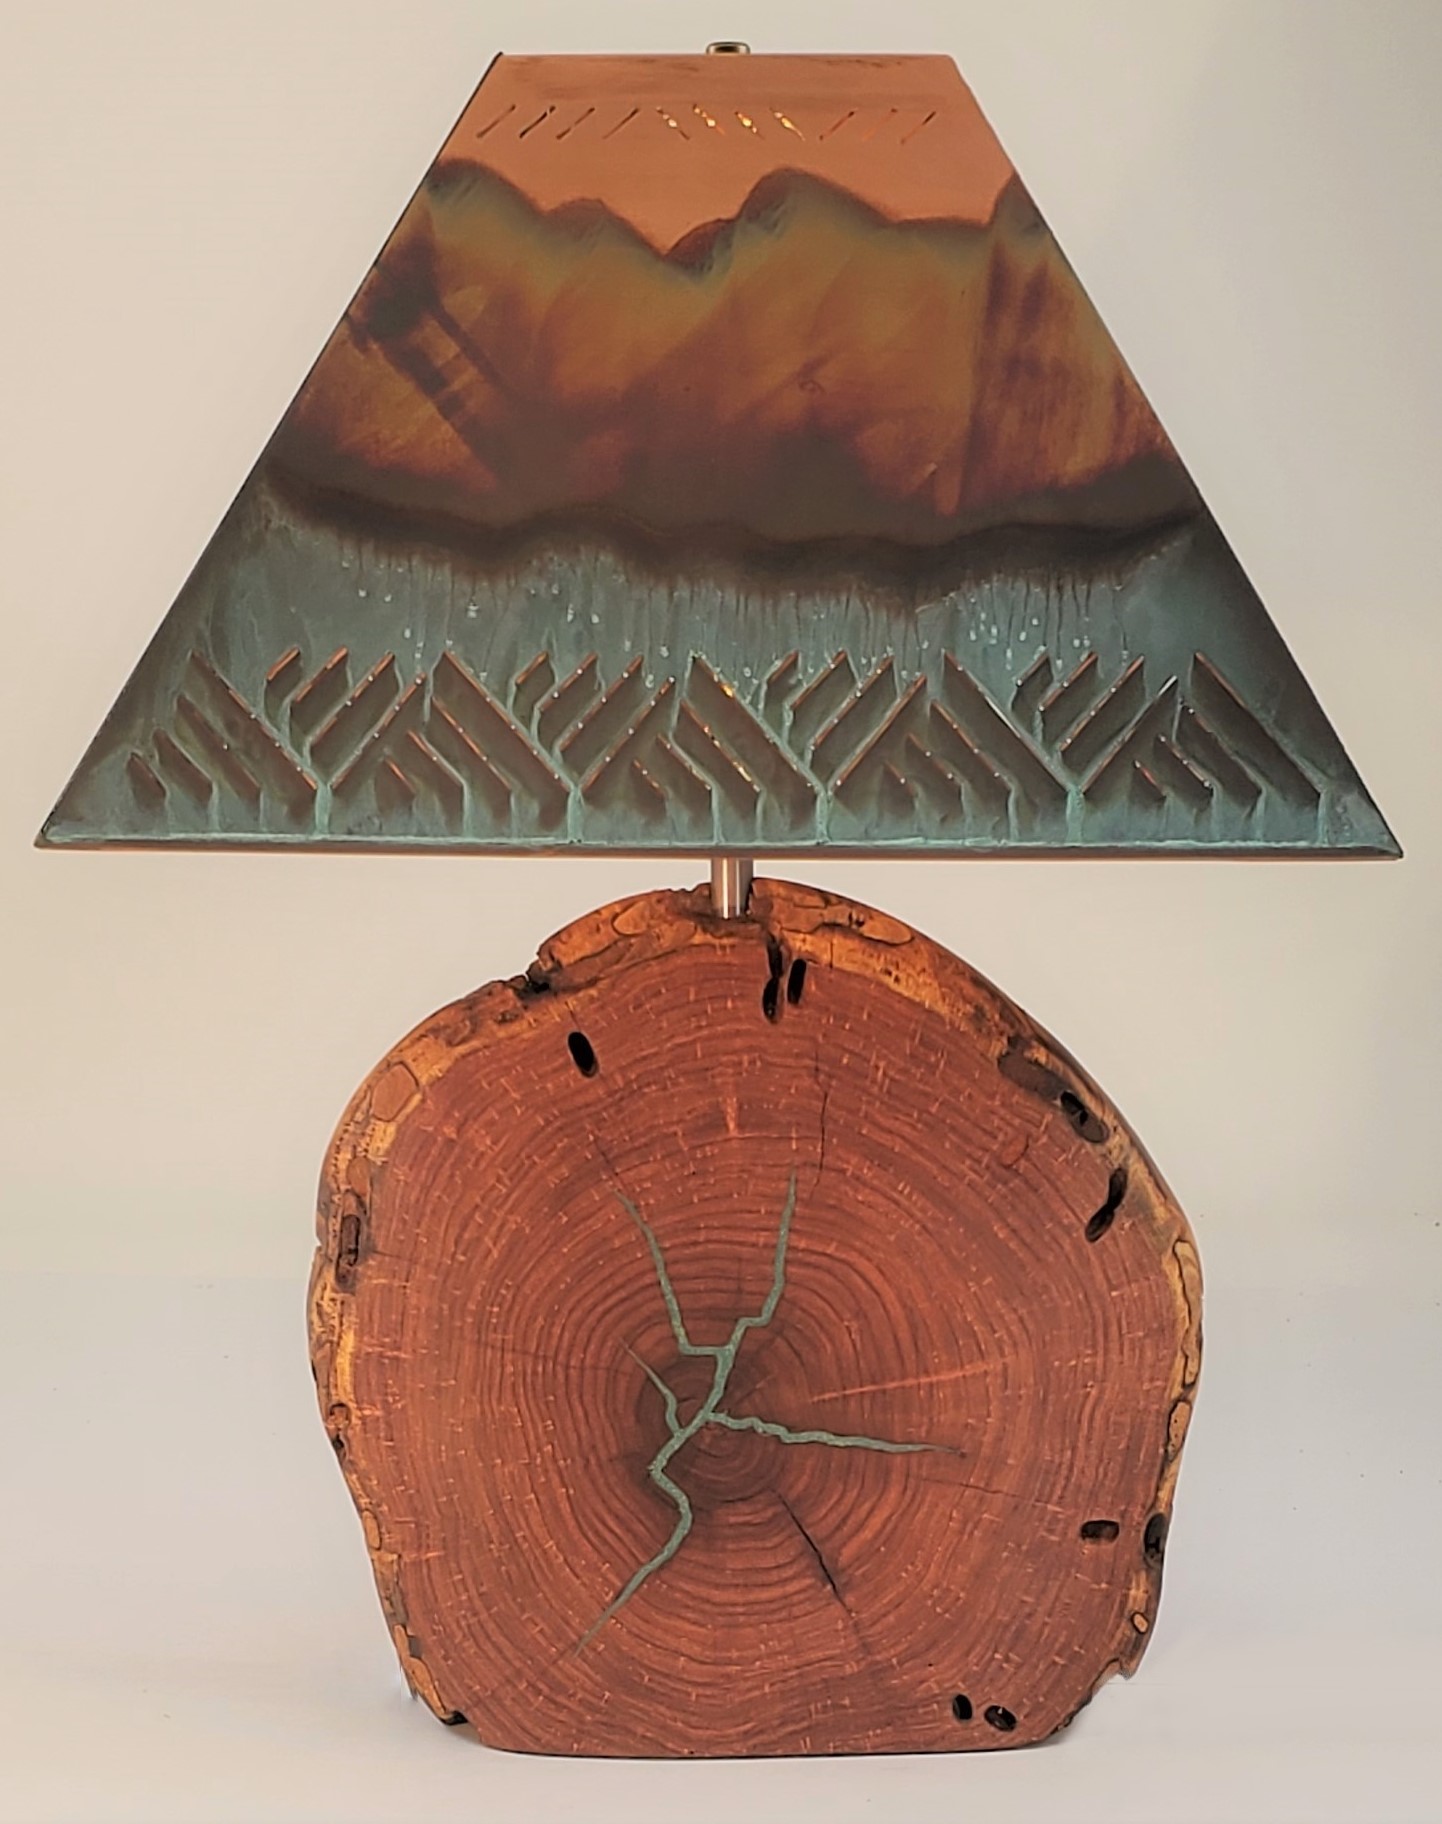 Mesquite Lamp with Turquoise Inlay and Copper Shade (Height: 24") #1023